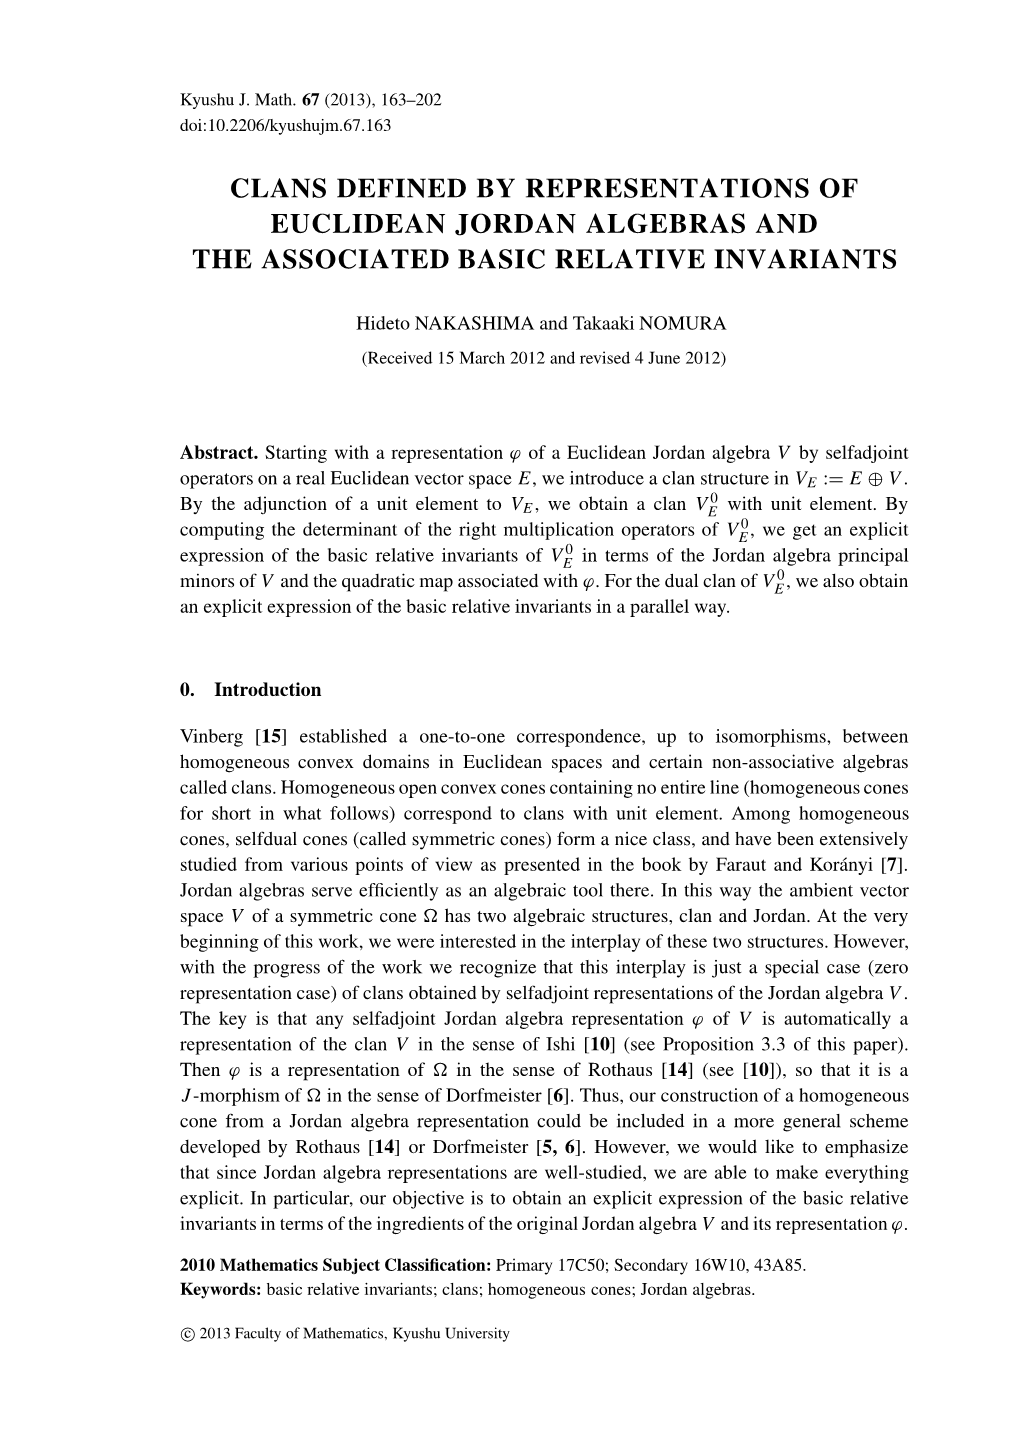 Clans Defined by Representations of Euclidean Jordan Algebras and the Associated Basic Relative Invariants